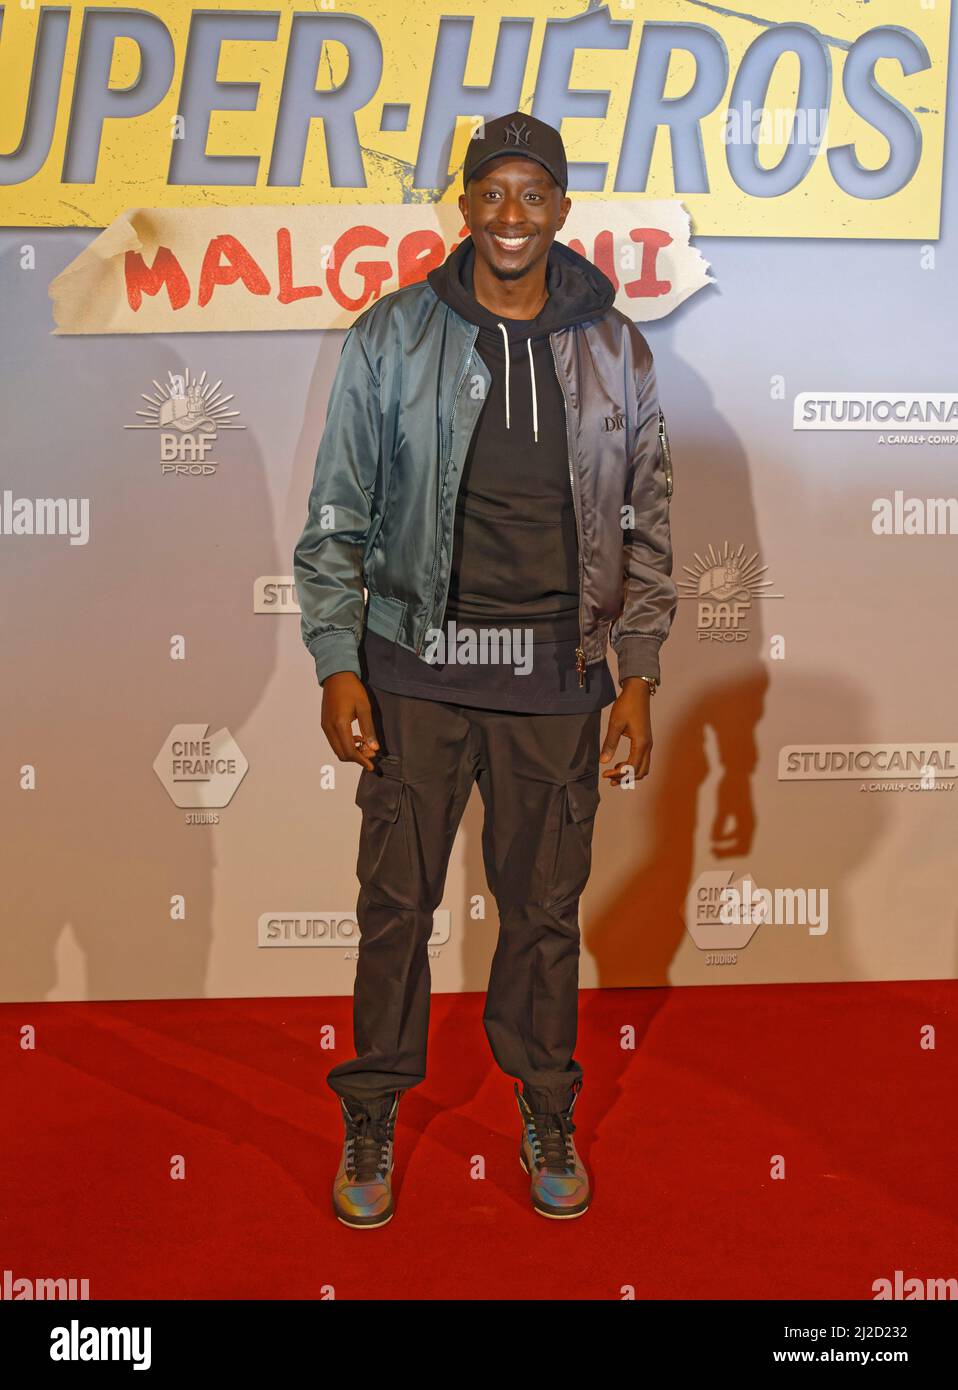 Ahmed Sylla attending the Super Heros Malgre Lui Premiere at the Grand Rex Cinema Paris, France Stock Photo